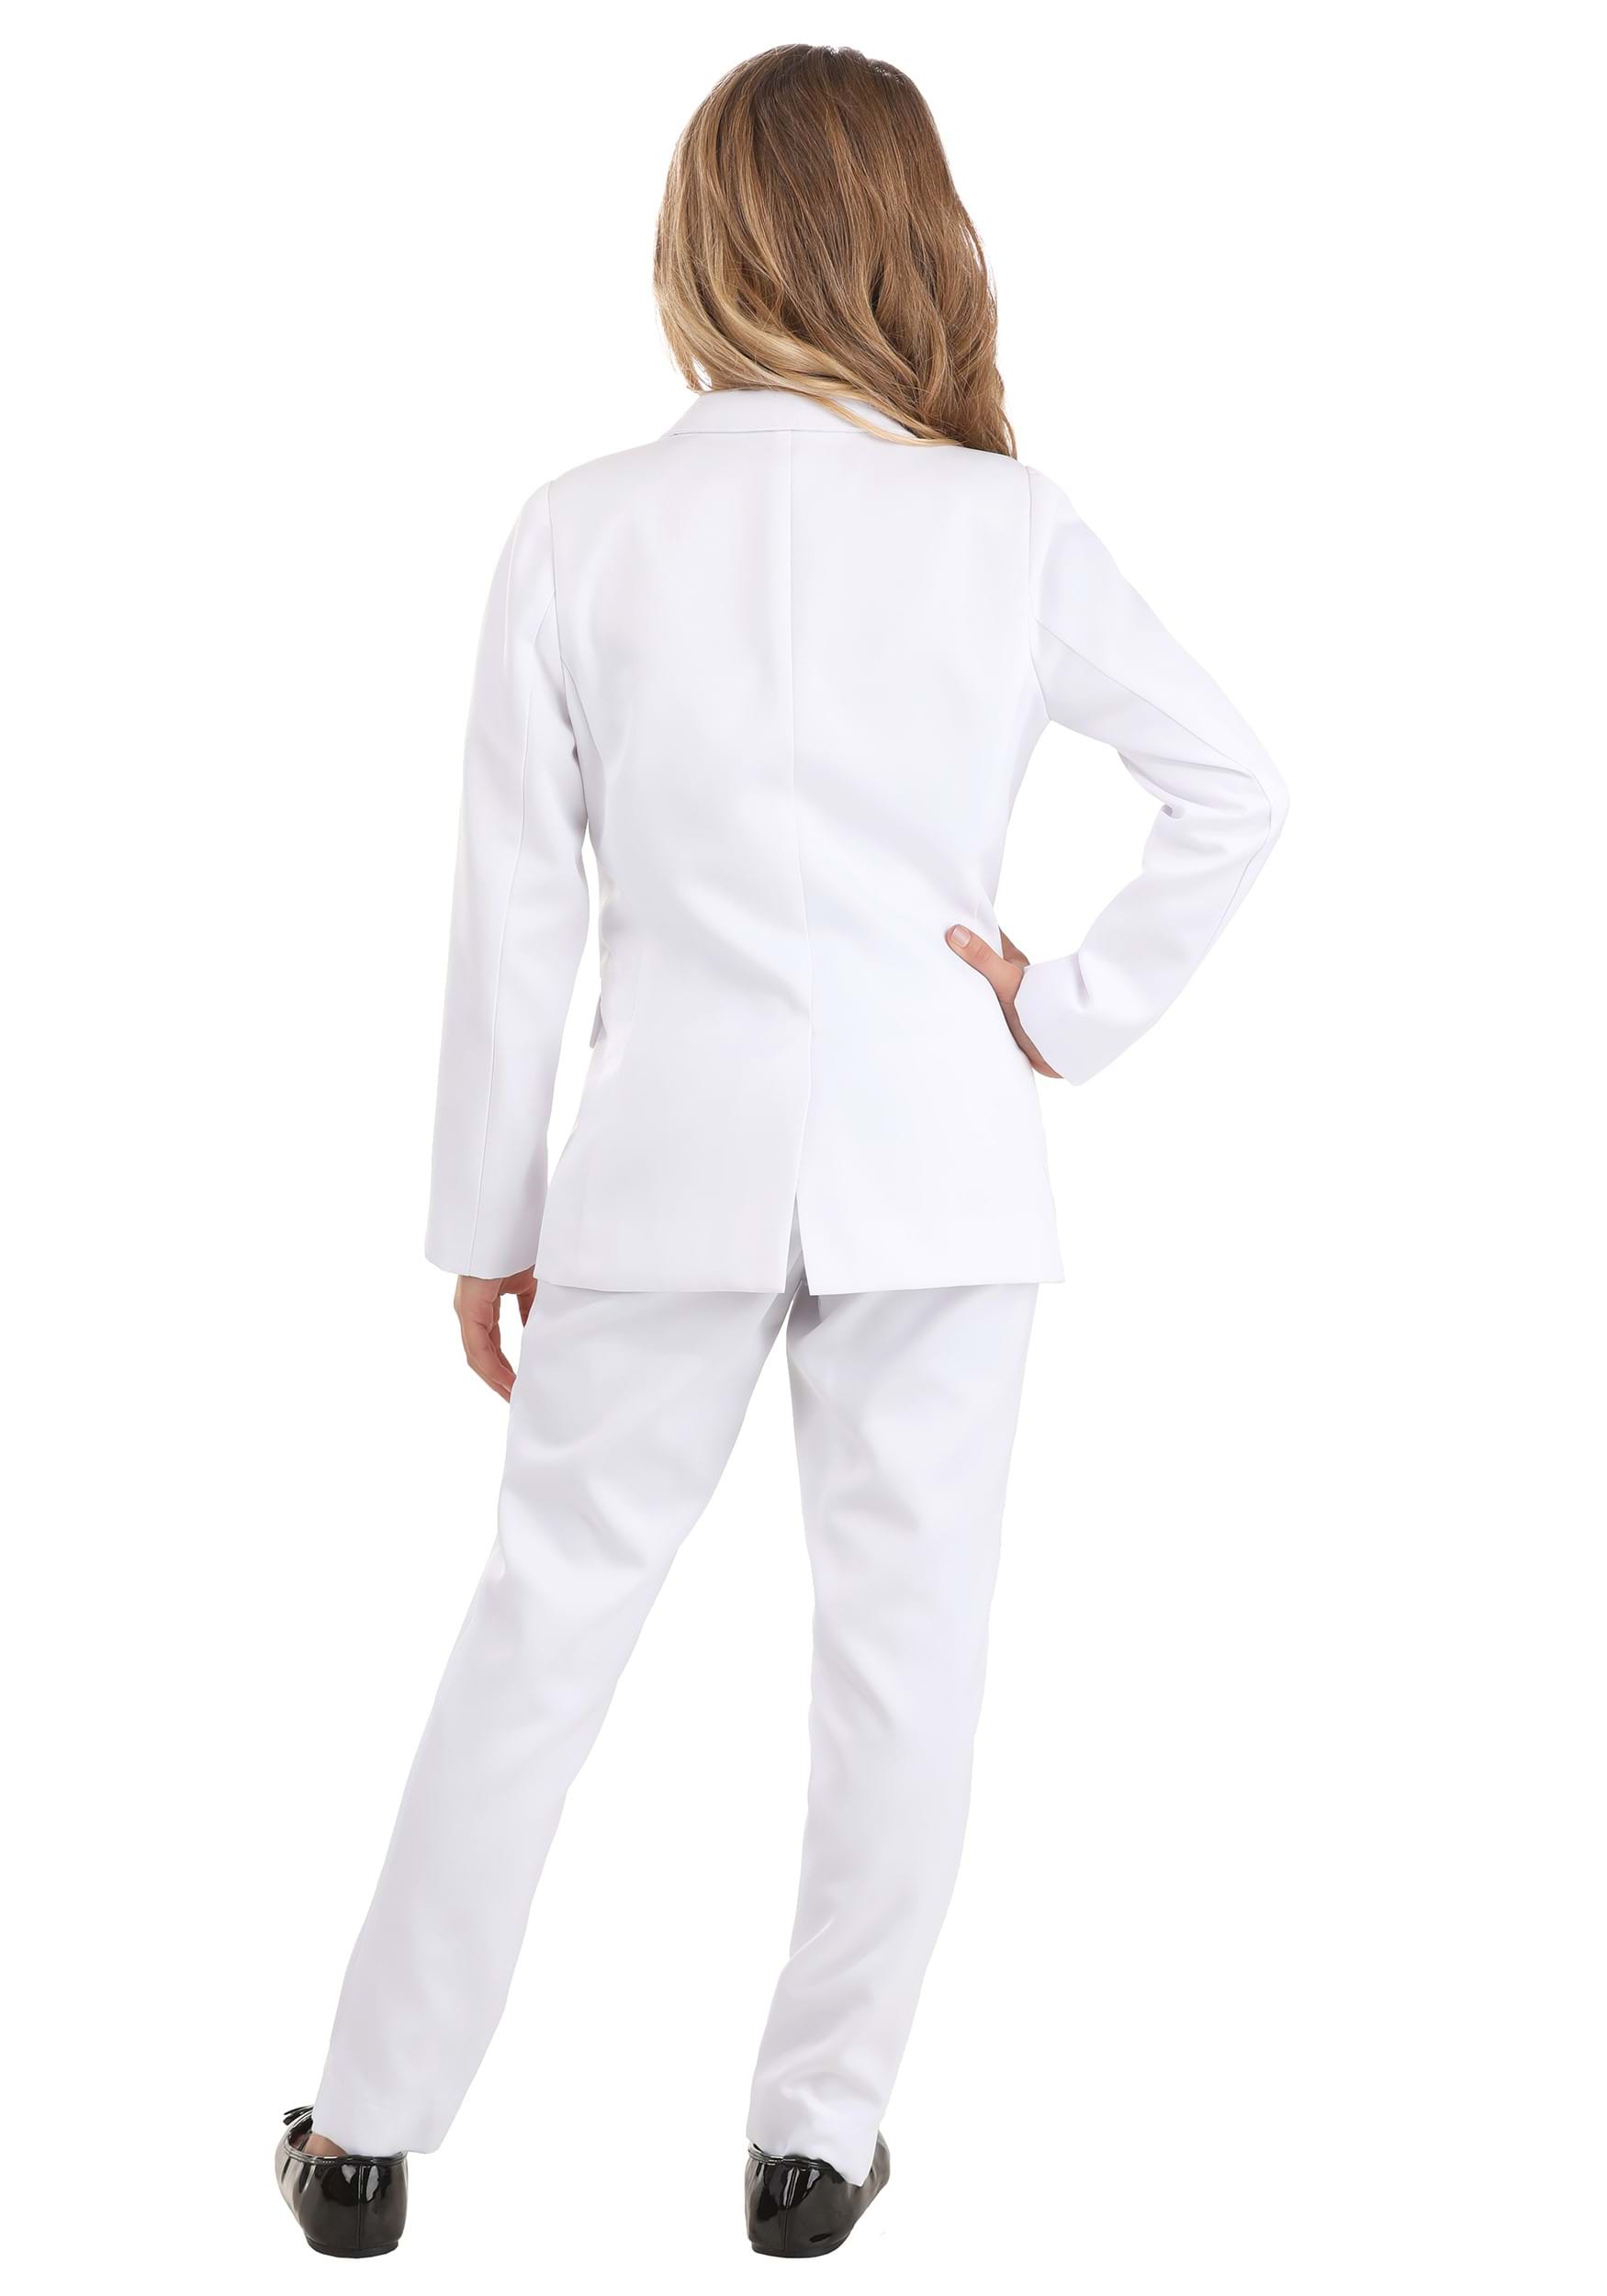 White Sport Suit Girls, Girls Clothes Age 10